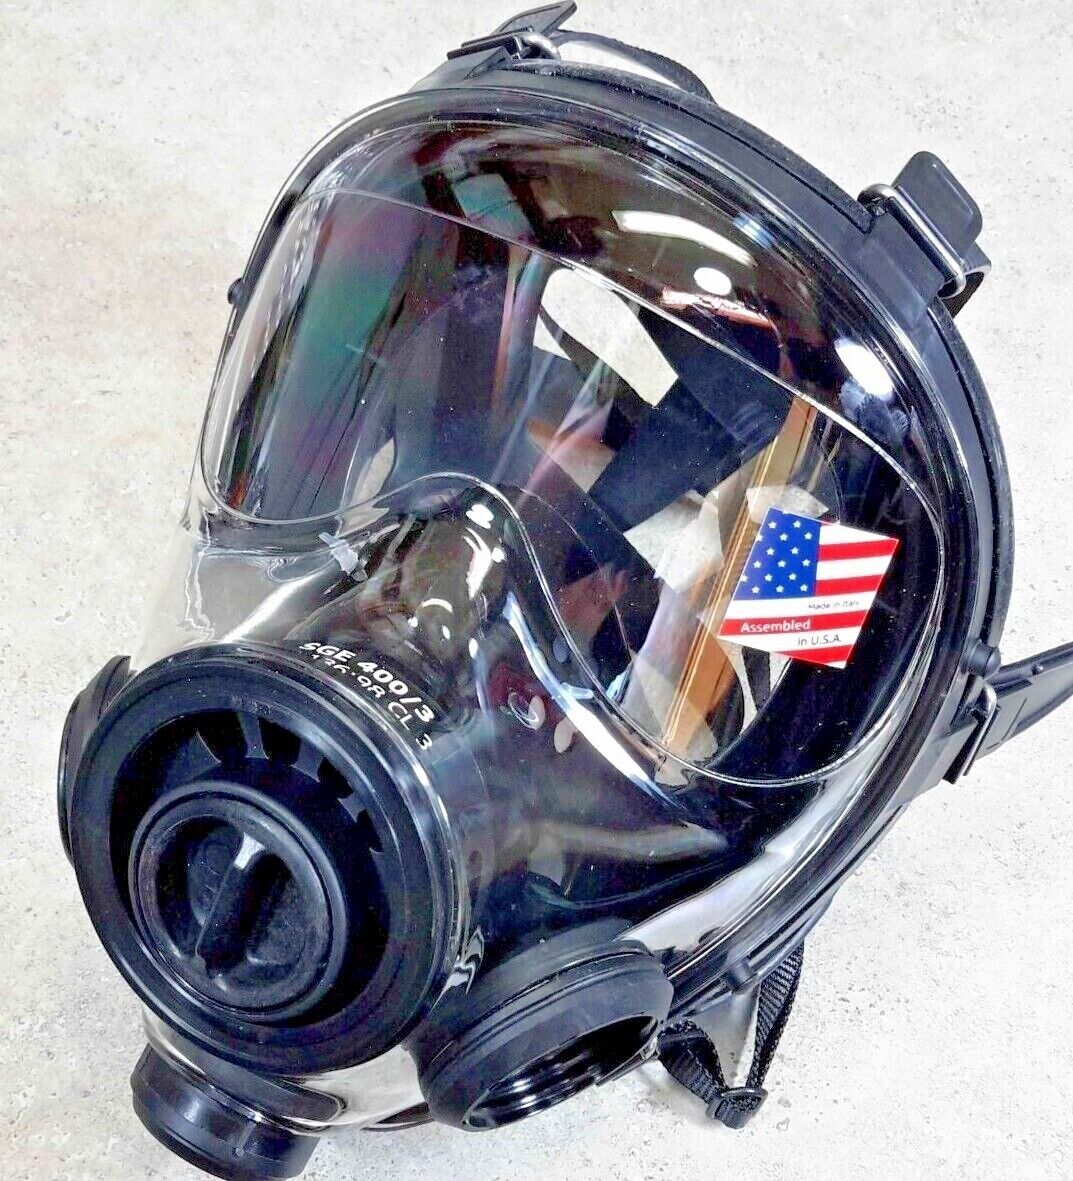 SGE 400/3 Gas Mask / 40mm Respirator - CBRN & NBC Protection -NEW - Made In 2023